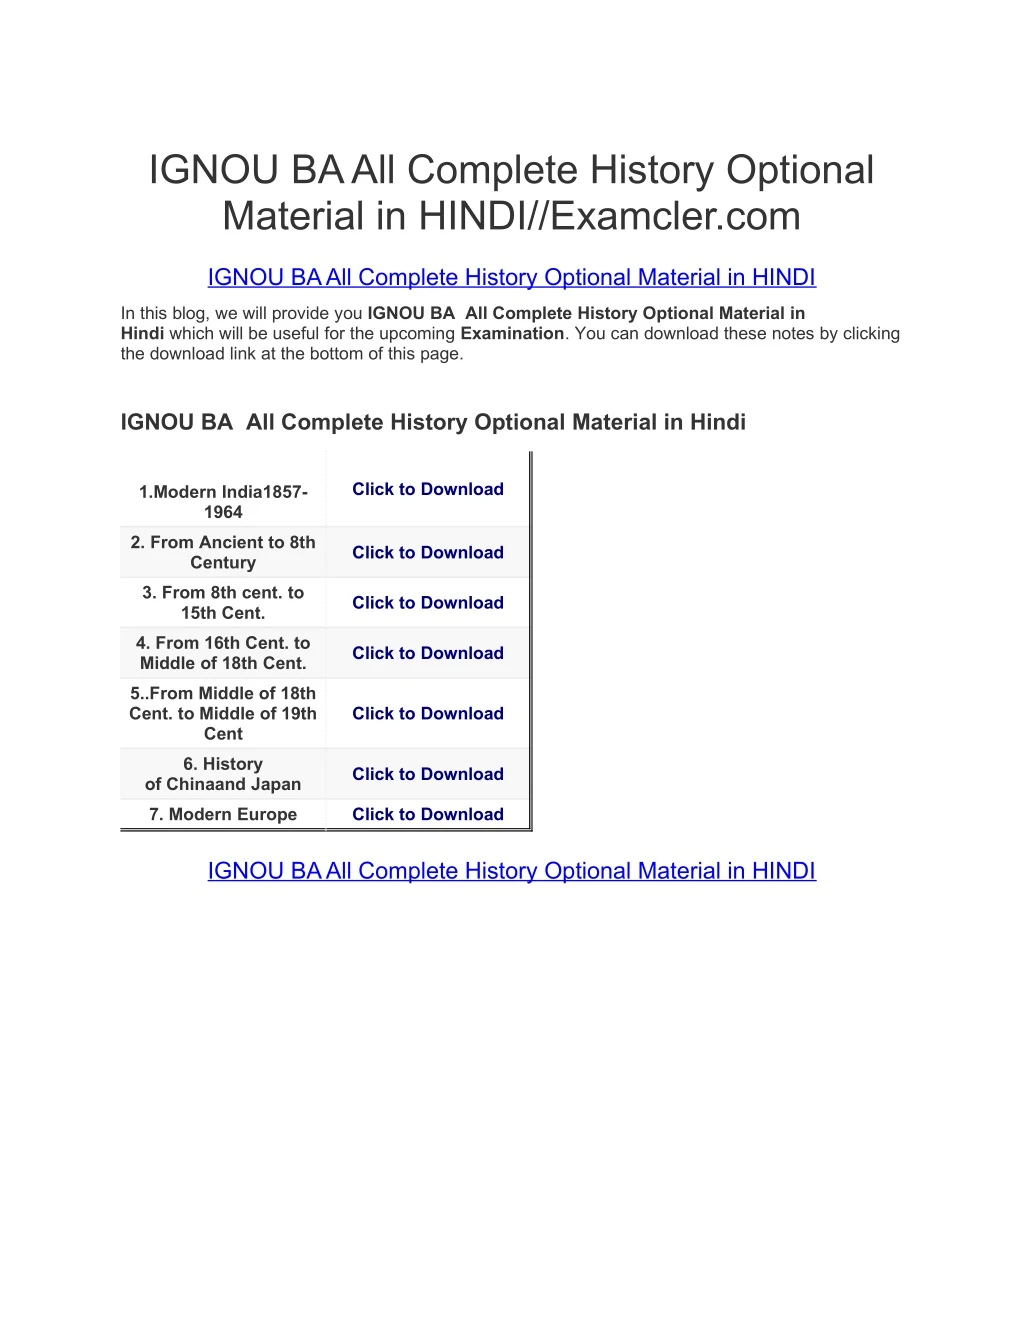 ignou ba all complete history optional material